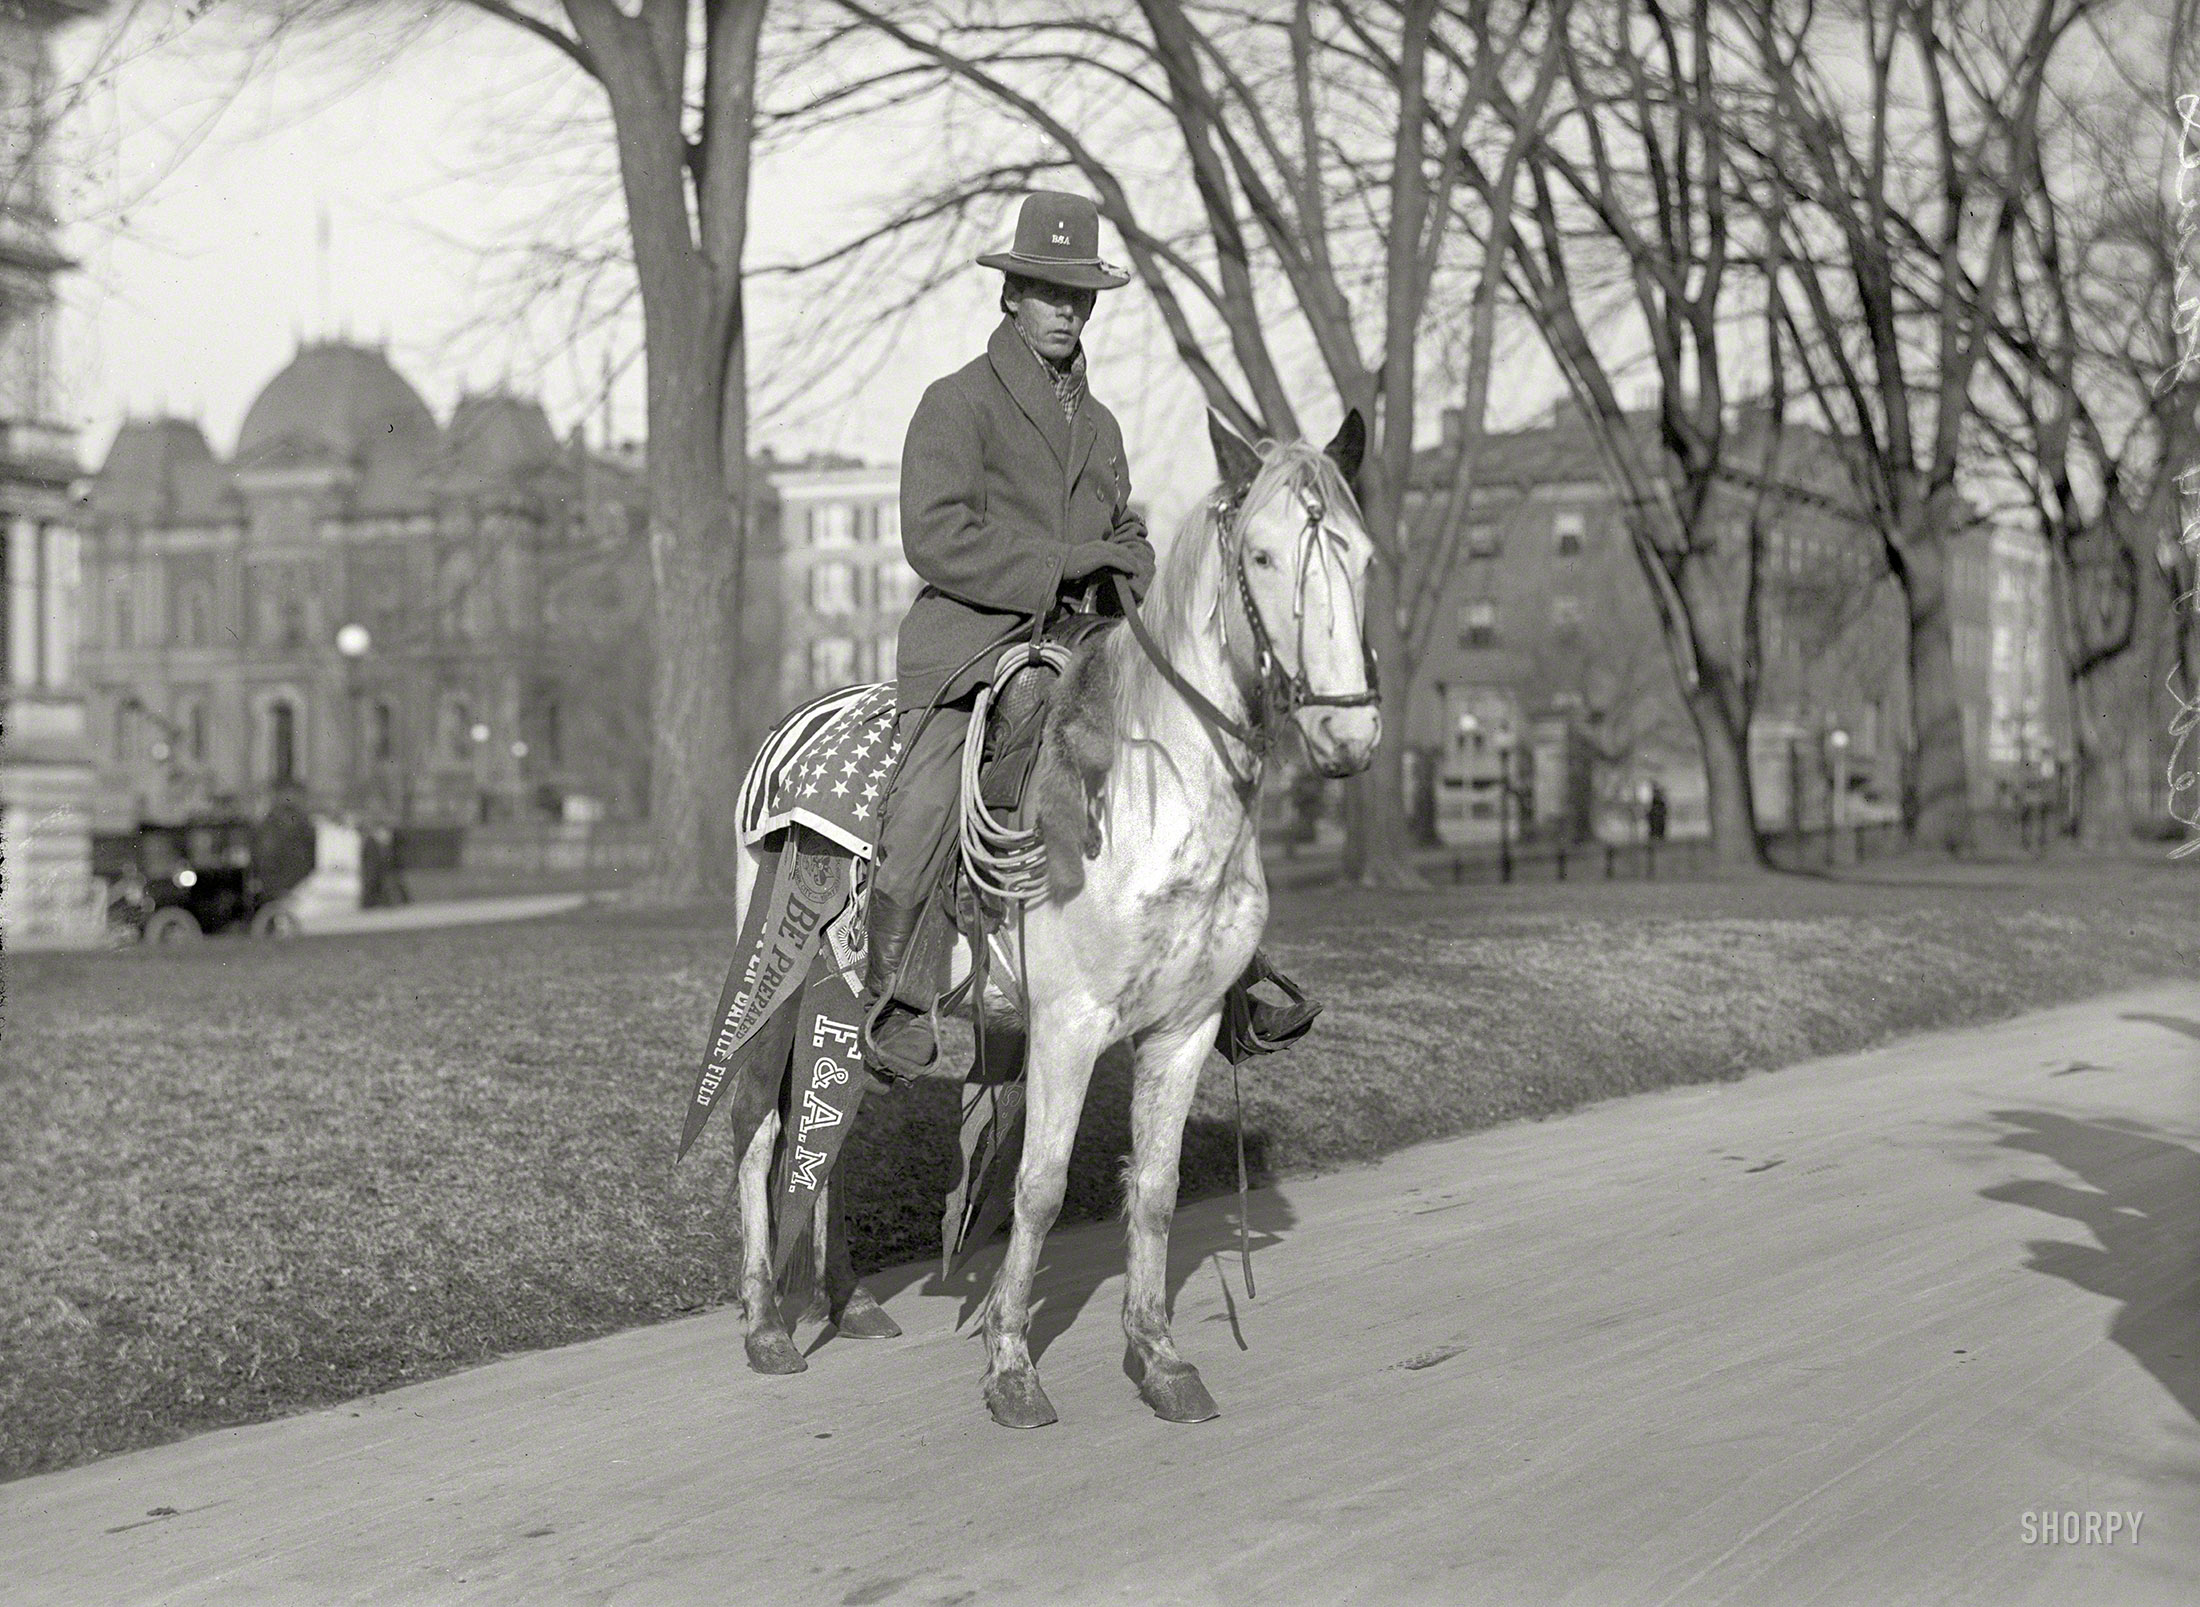 1915. "Indians, American. Red Fox James at White House." The young Blackfoot with the Boy Scouts pin, last seen here, was in Washington to petition the government for a national day honoring Native Americans. State, War & Navy Building at far left. Harris & Ewing Collection glass negative. View full size.